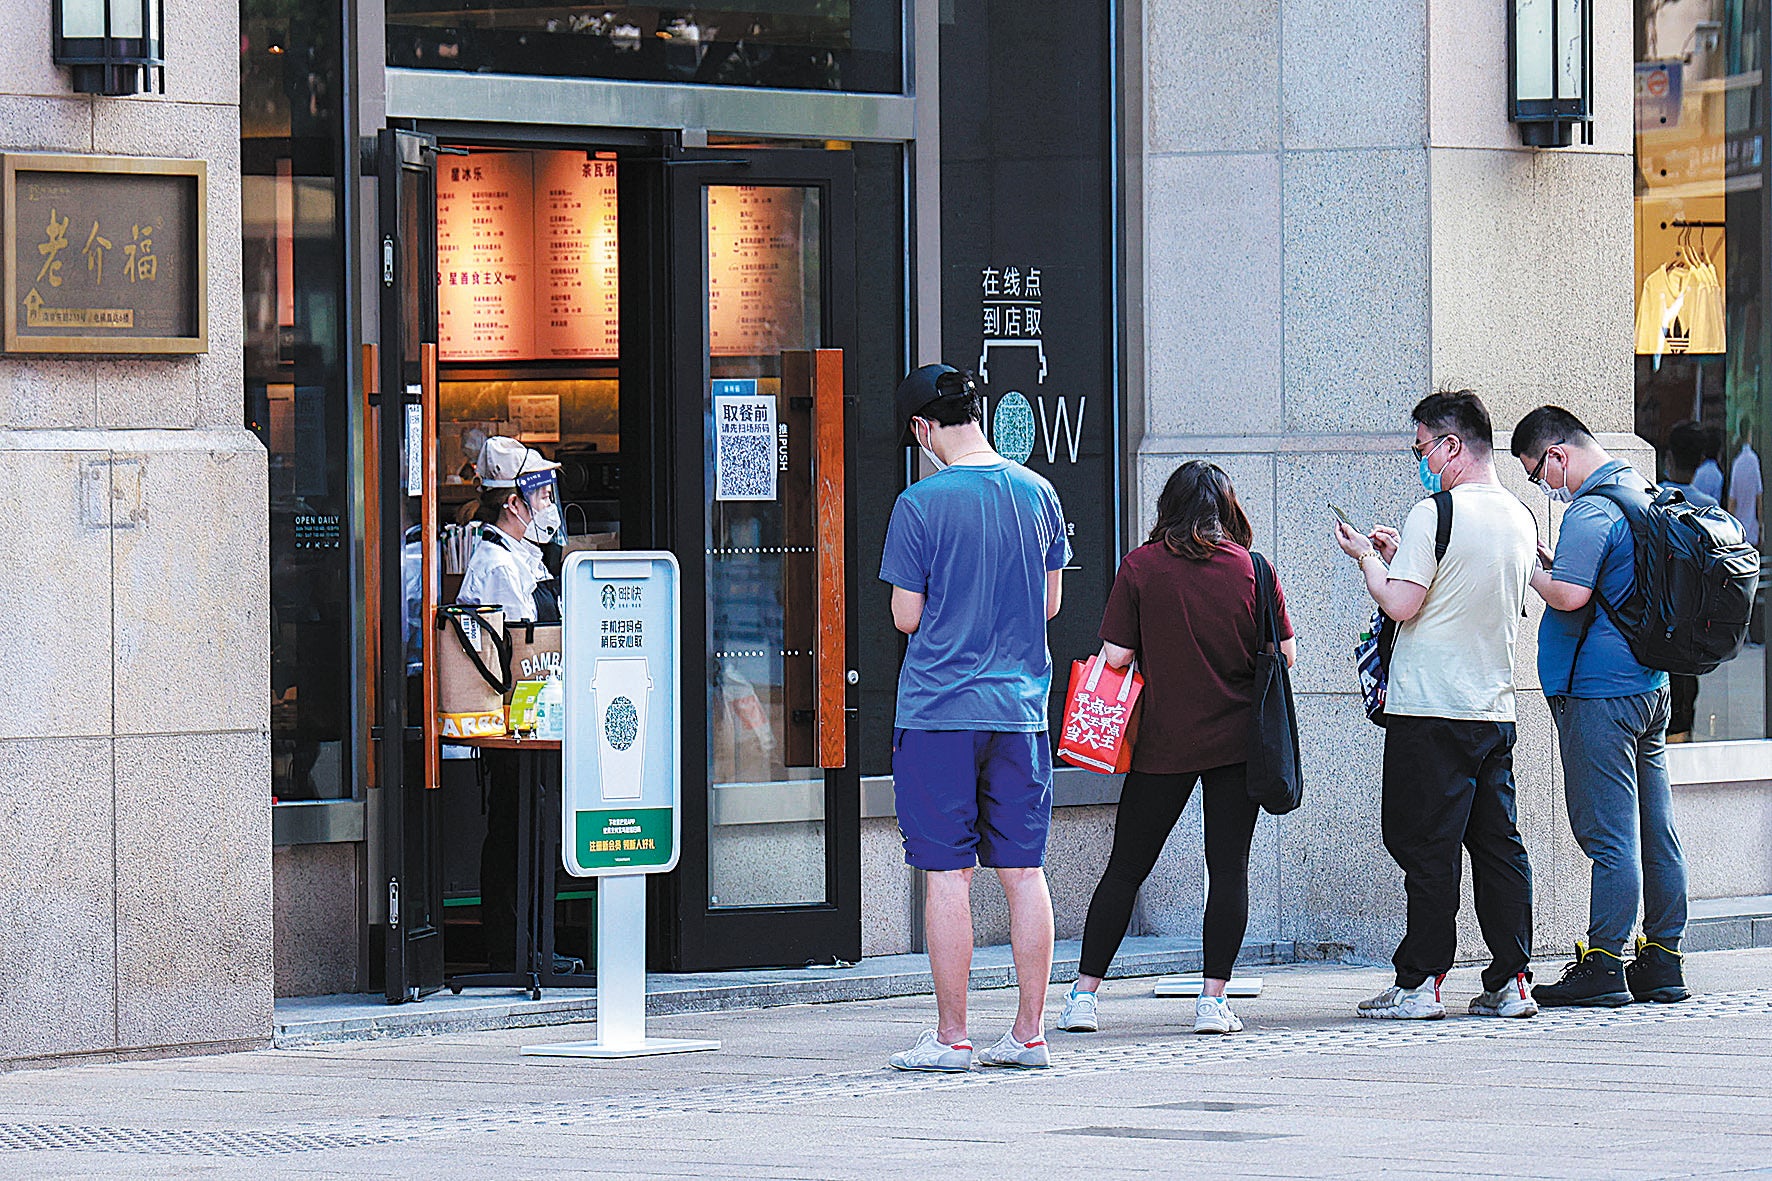 Customers use their phones to buy coffee outside a Starbucks branch in Shanghai on June 2